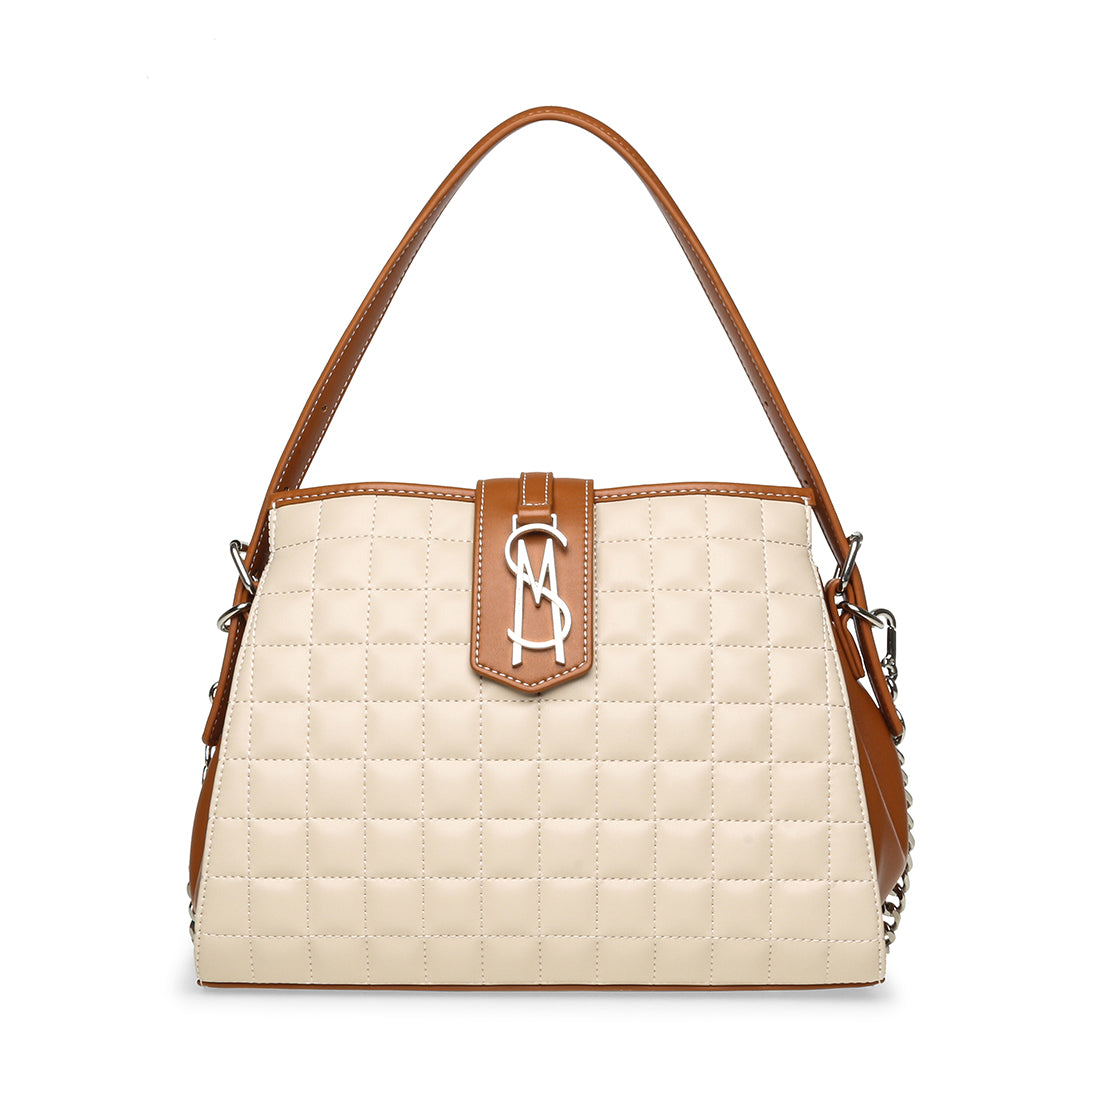 Designer Bag Sale!!! Steven by Steve Madden 'Candy Coated' Snake Embossed  Tote | Beauty According to Bree